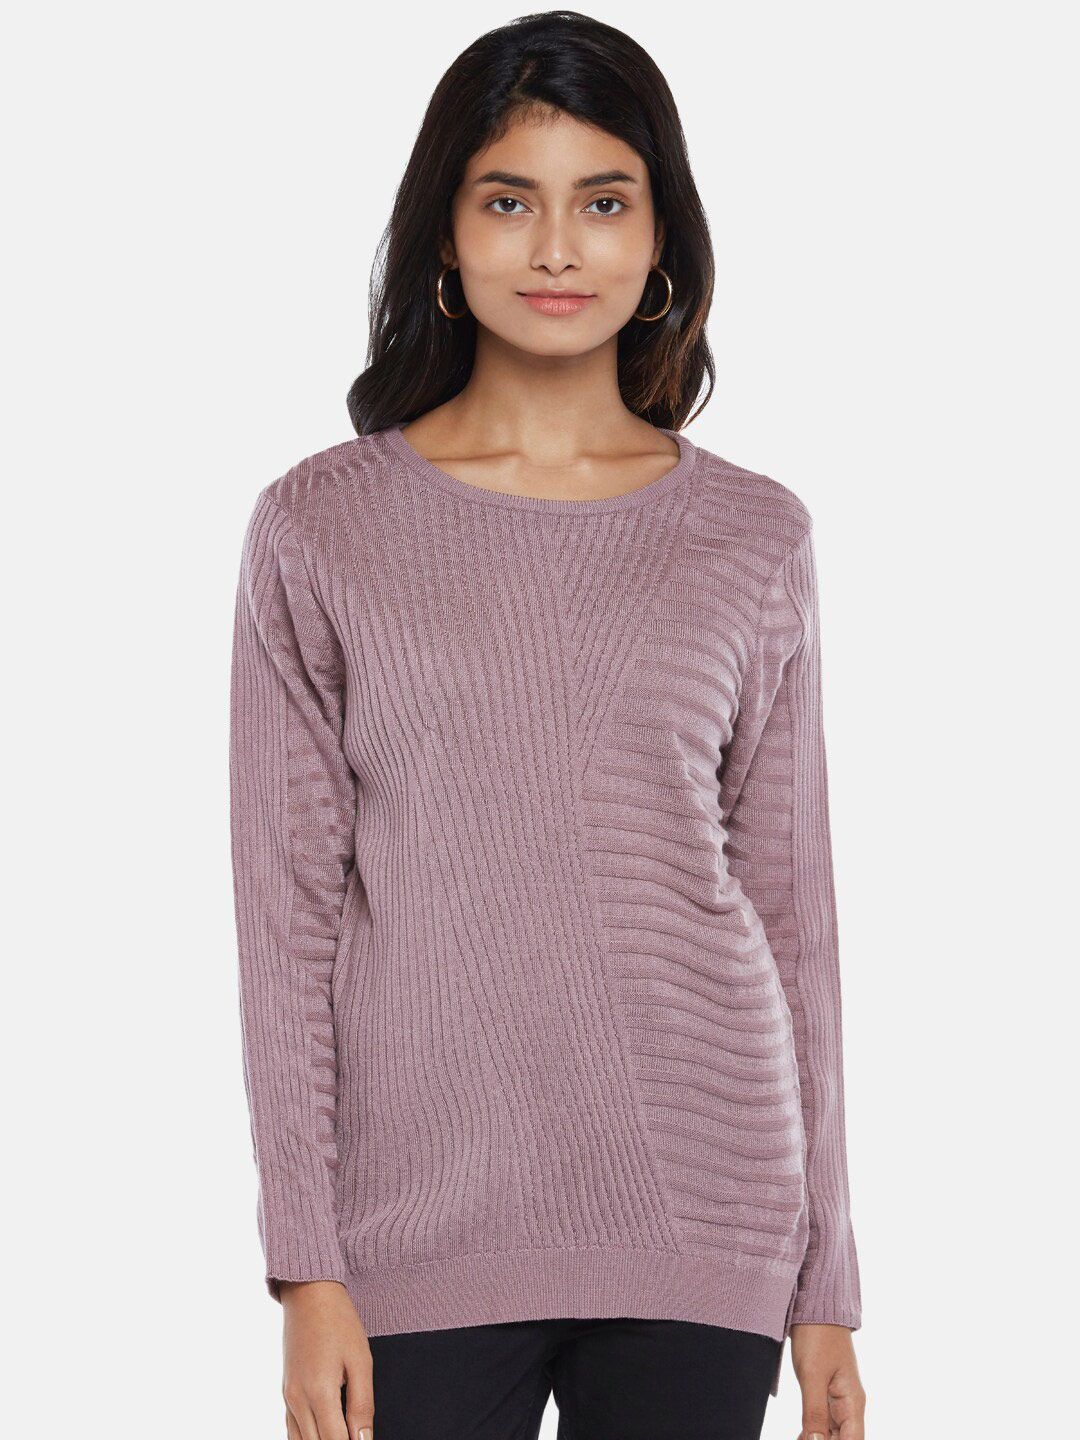 Honey by Pantaloons Women Lavender & sleet Cable Knit Sweater Price in India